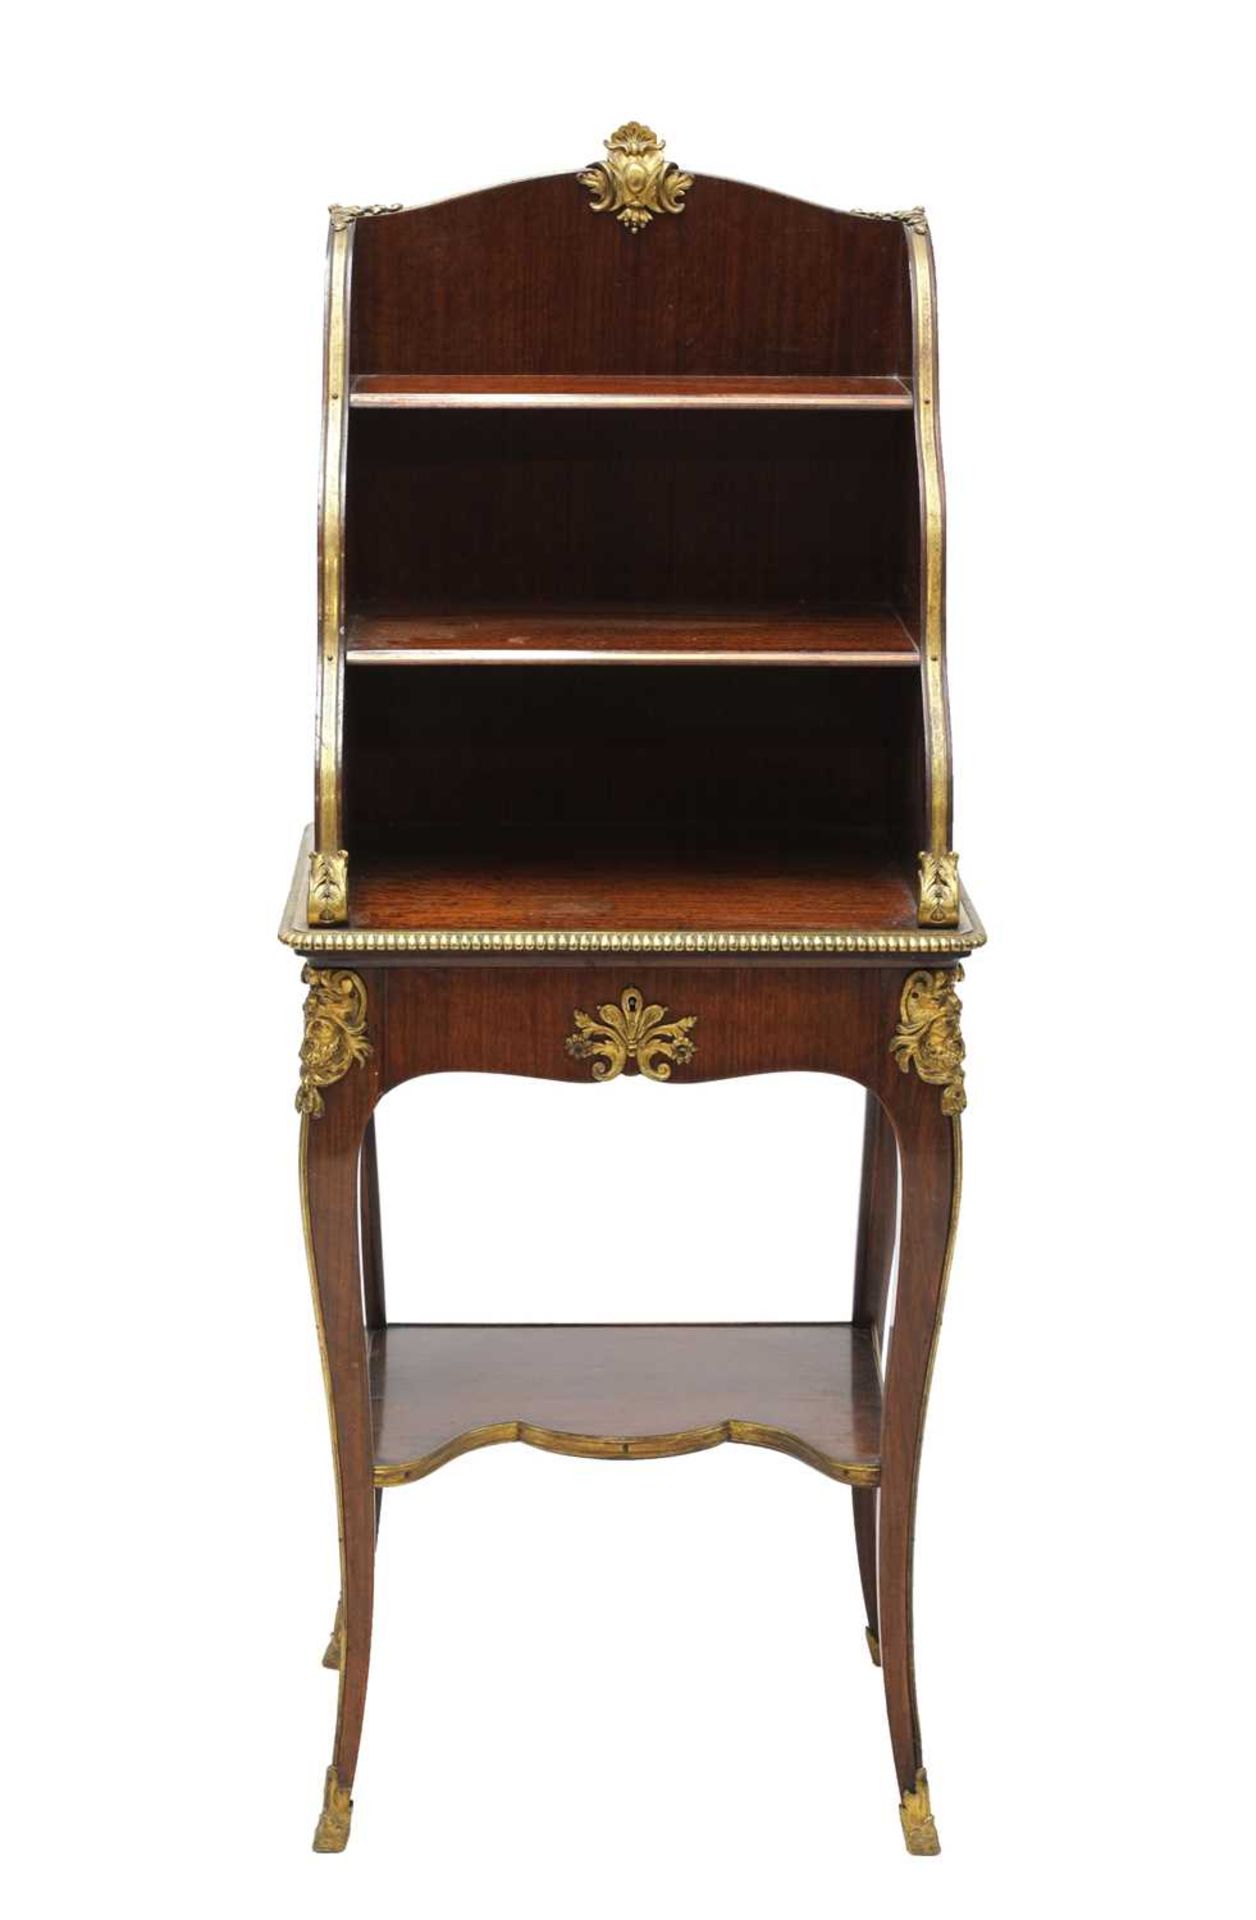 A Louis XV-style mahogany and gilt-bronze-mounted bookcase, - Image 2 of 6